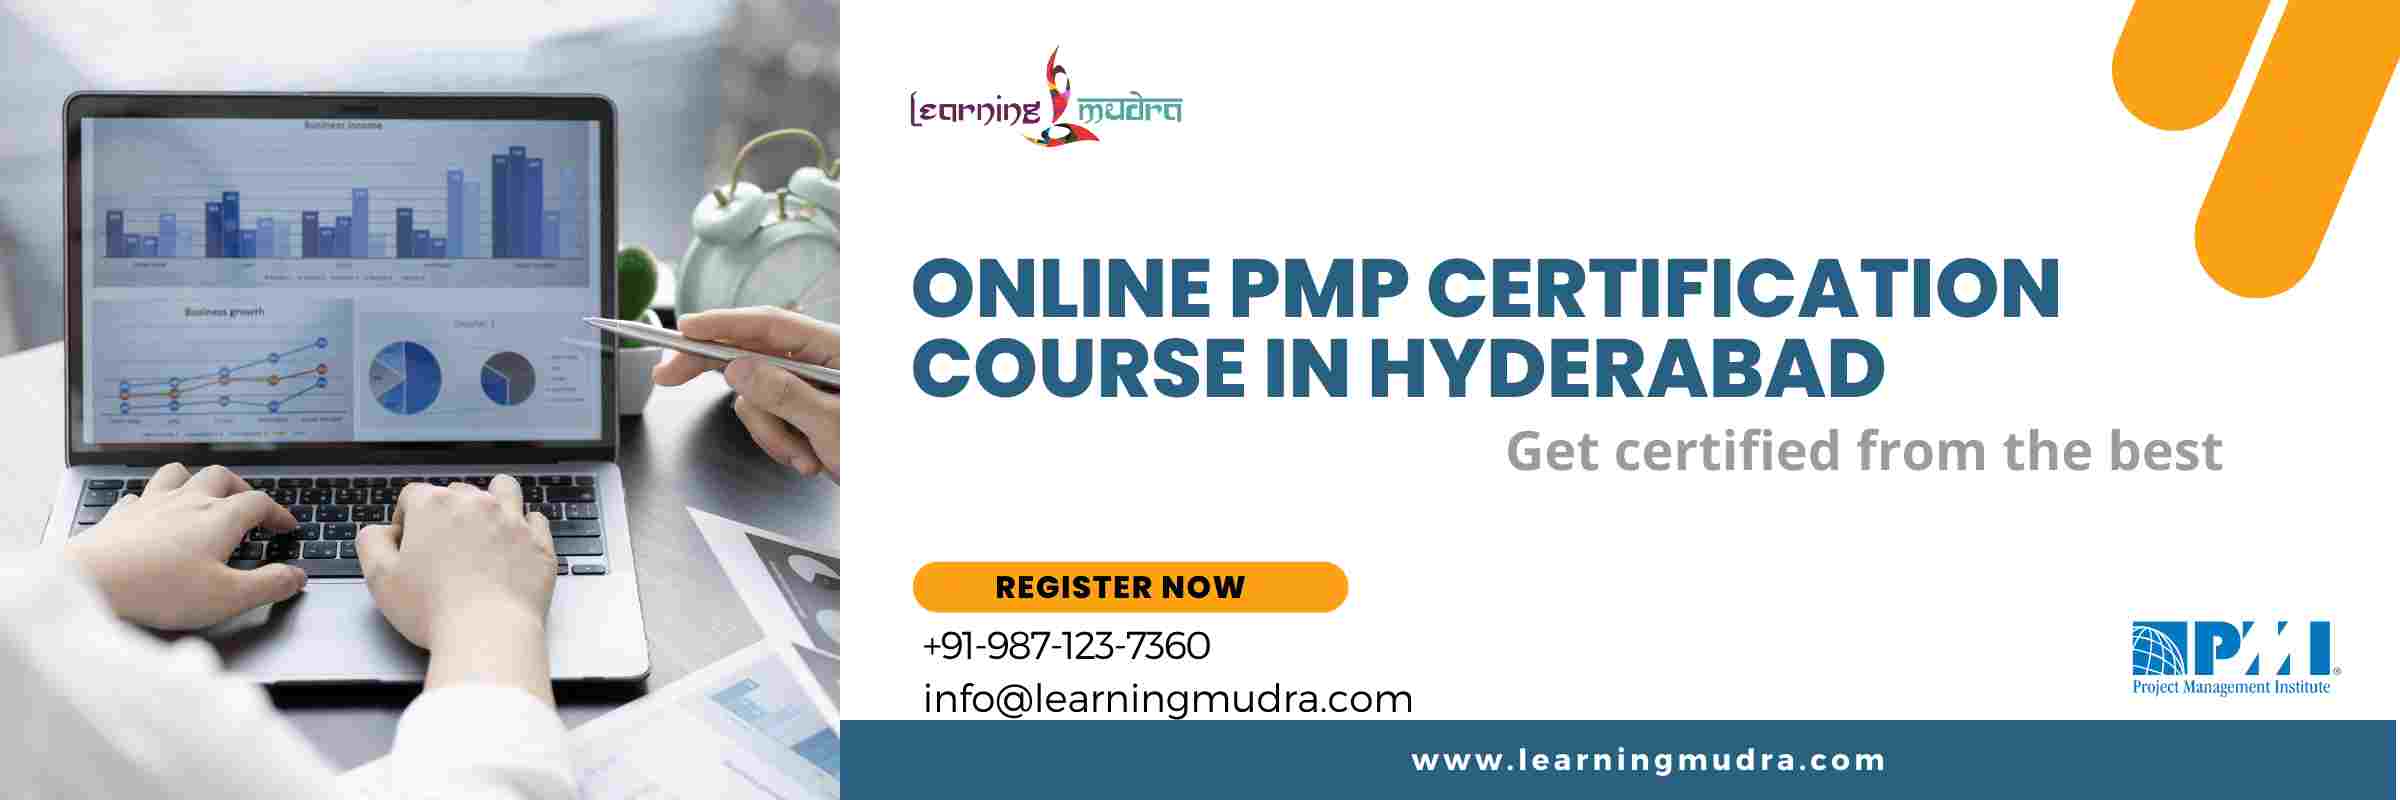 online pmp certification course in hyderabad